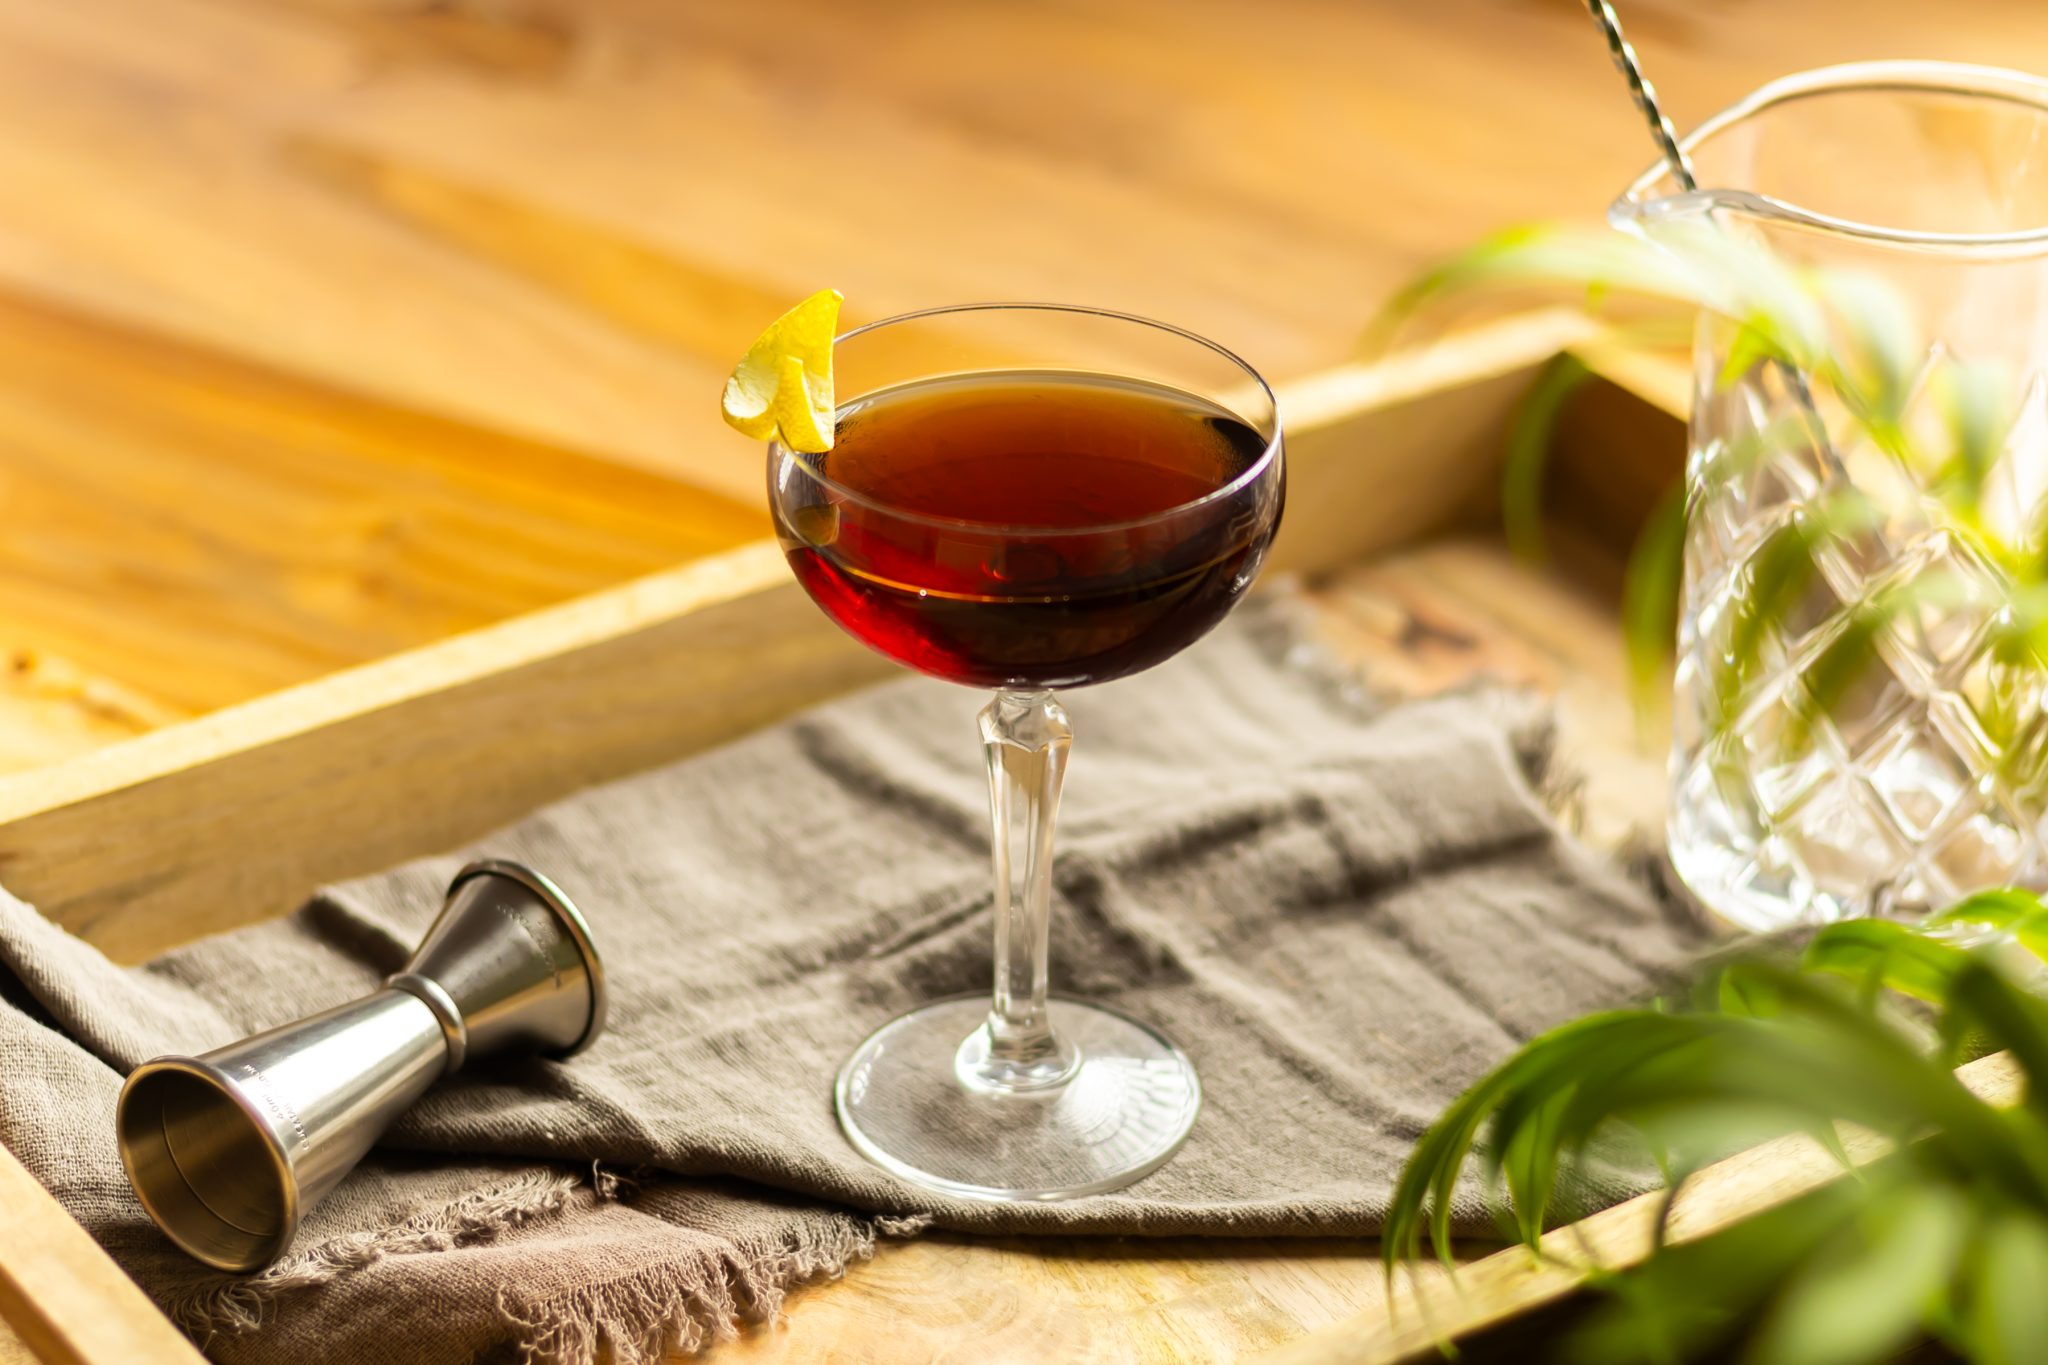 A side shot of an Affinity cocktail in a cocktail glass on a wooden tray on a wooden table surrounded by a grey cloth, and a jigger